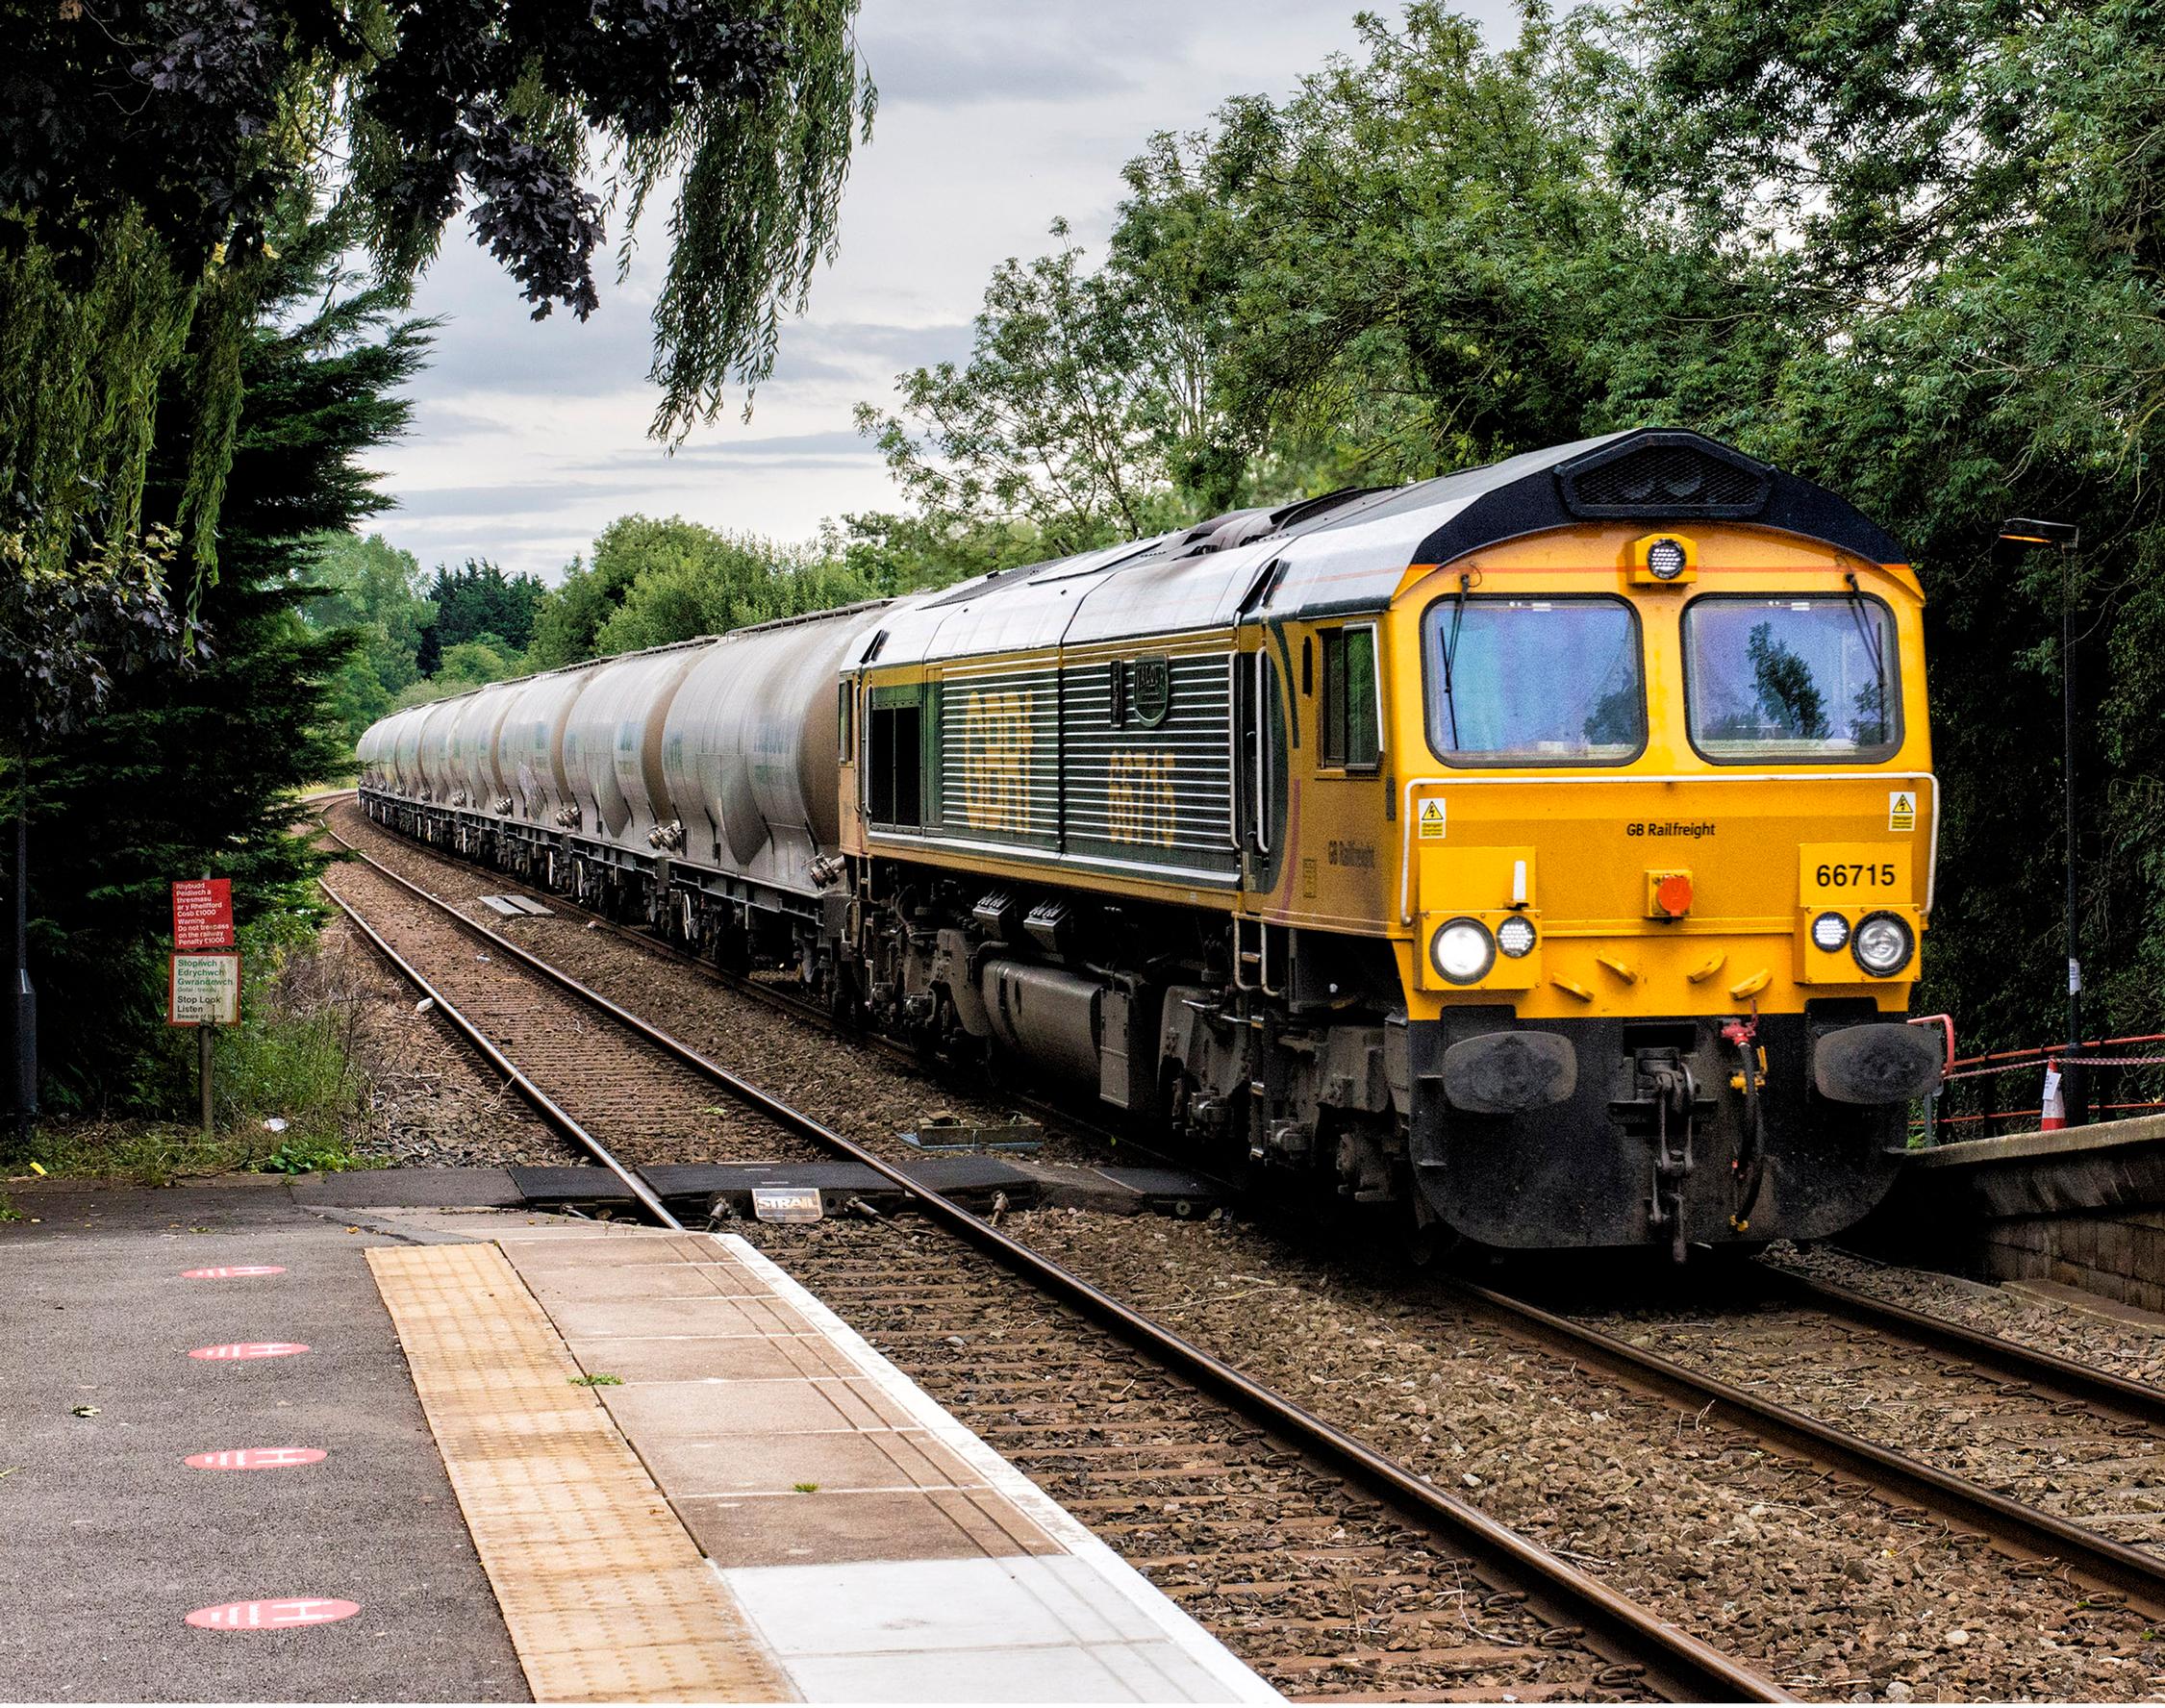 GB Railfreight seeks additional paths for freight trains between a cement factory in Flintshire and the Hinkley Point nuclear power station site in Somerset